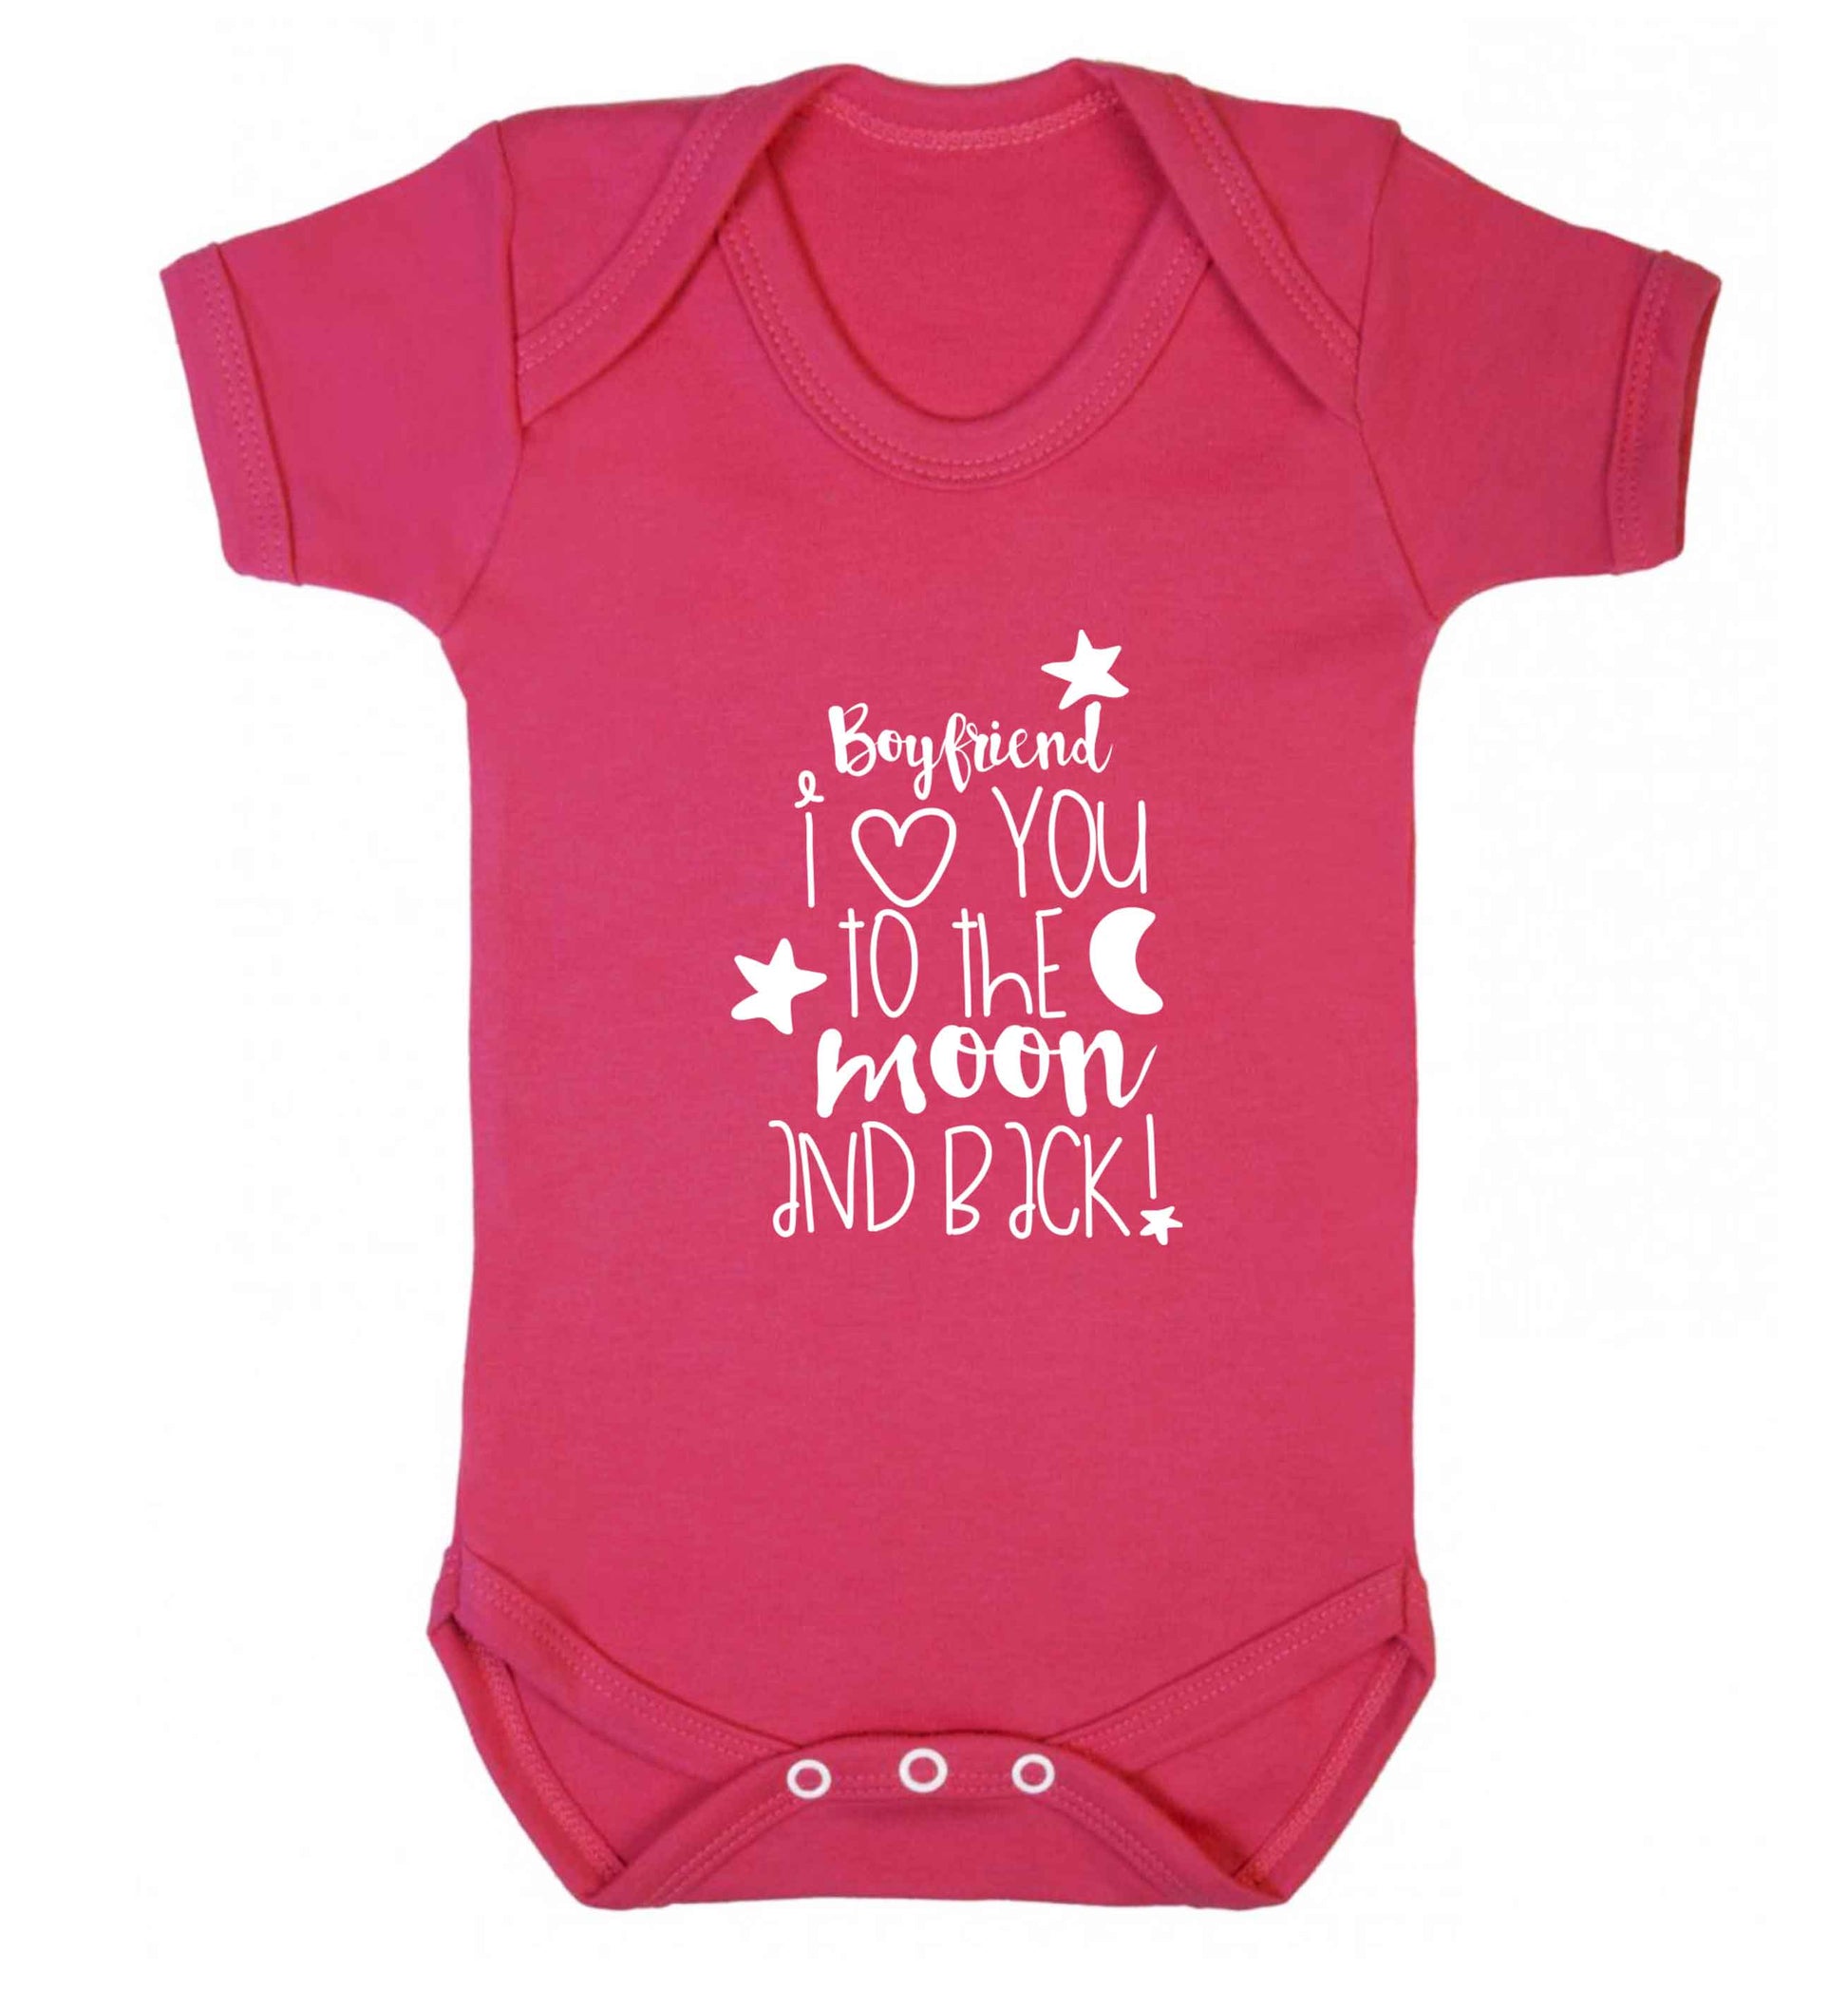 Boyfriend I love you to the moon and back baby vest dark pink 18-24 months